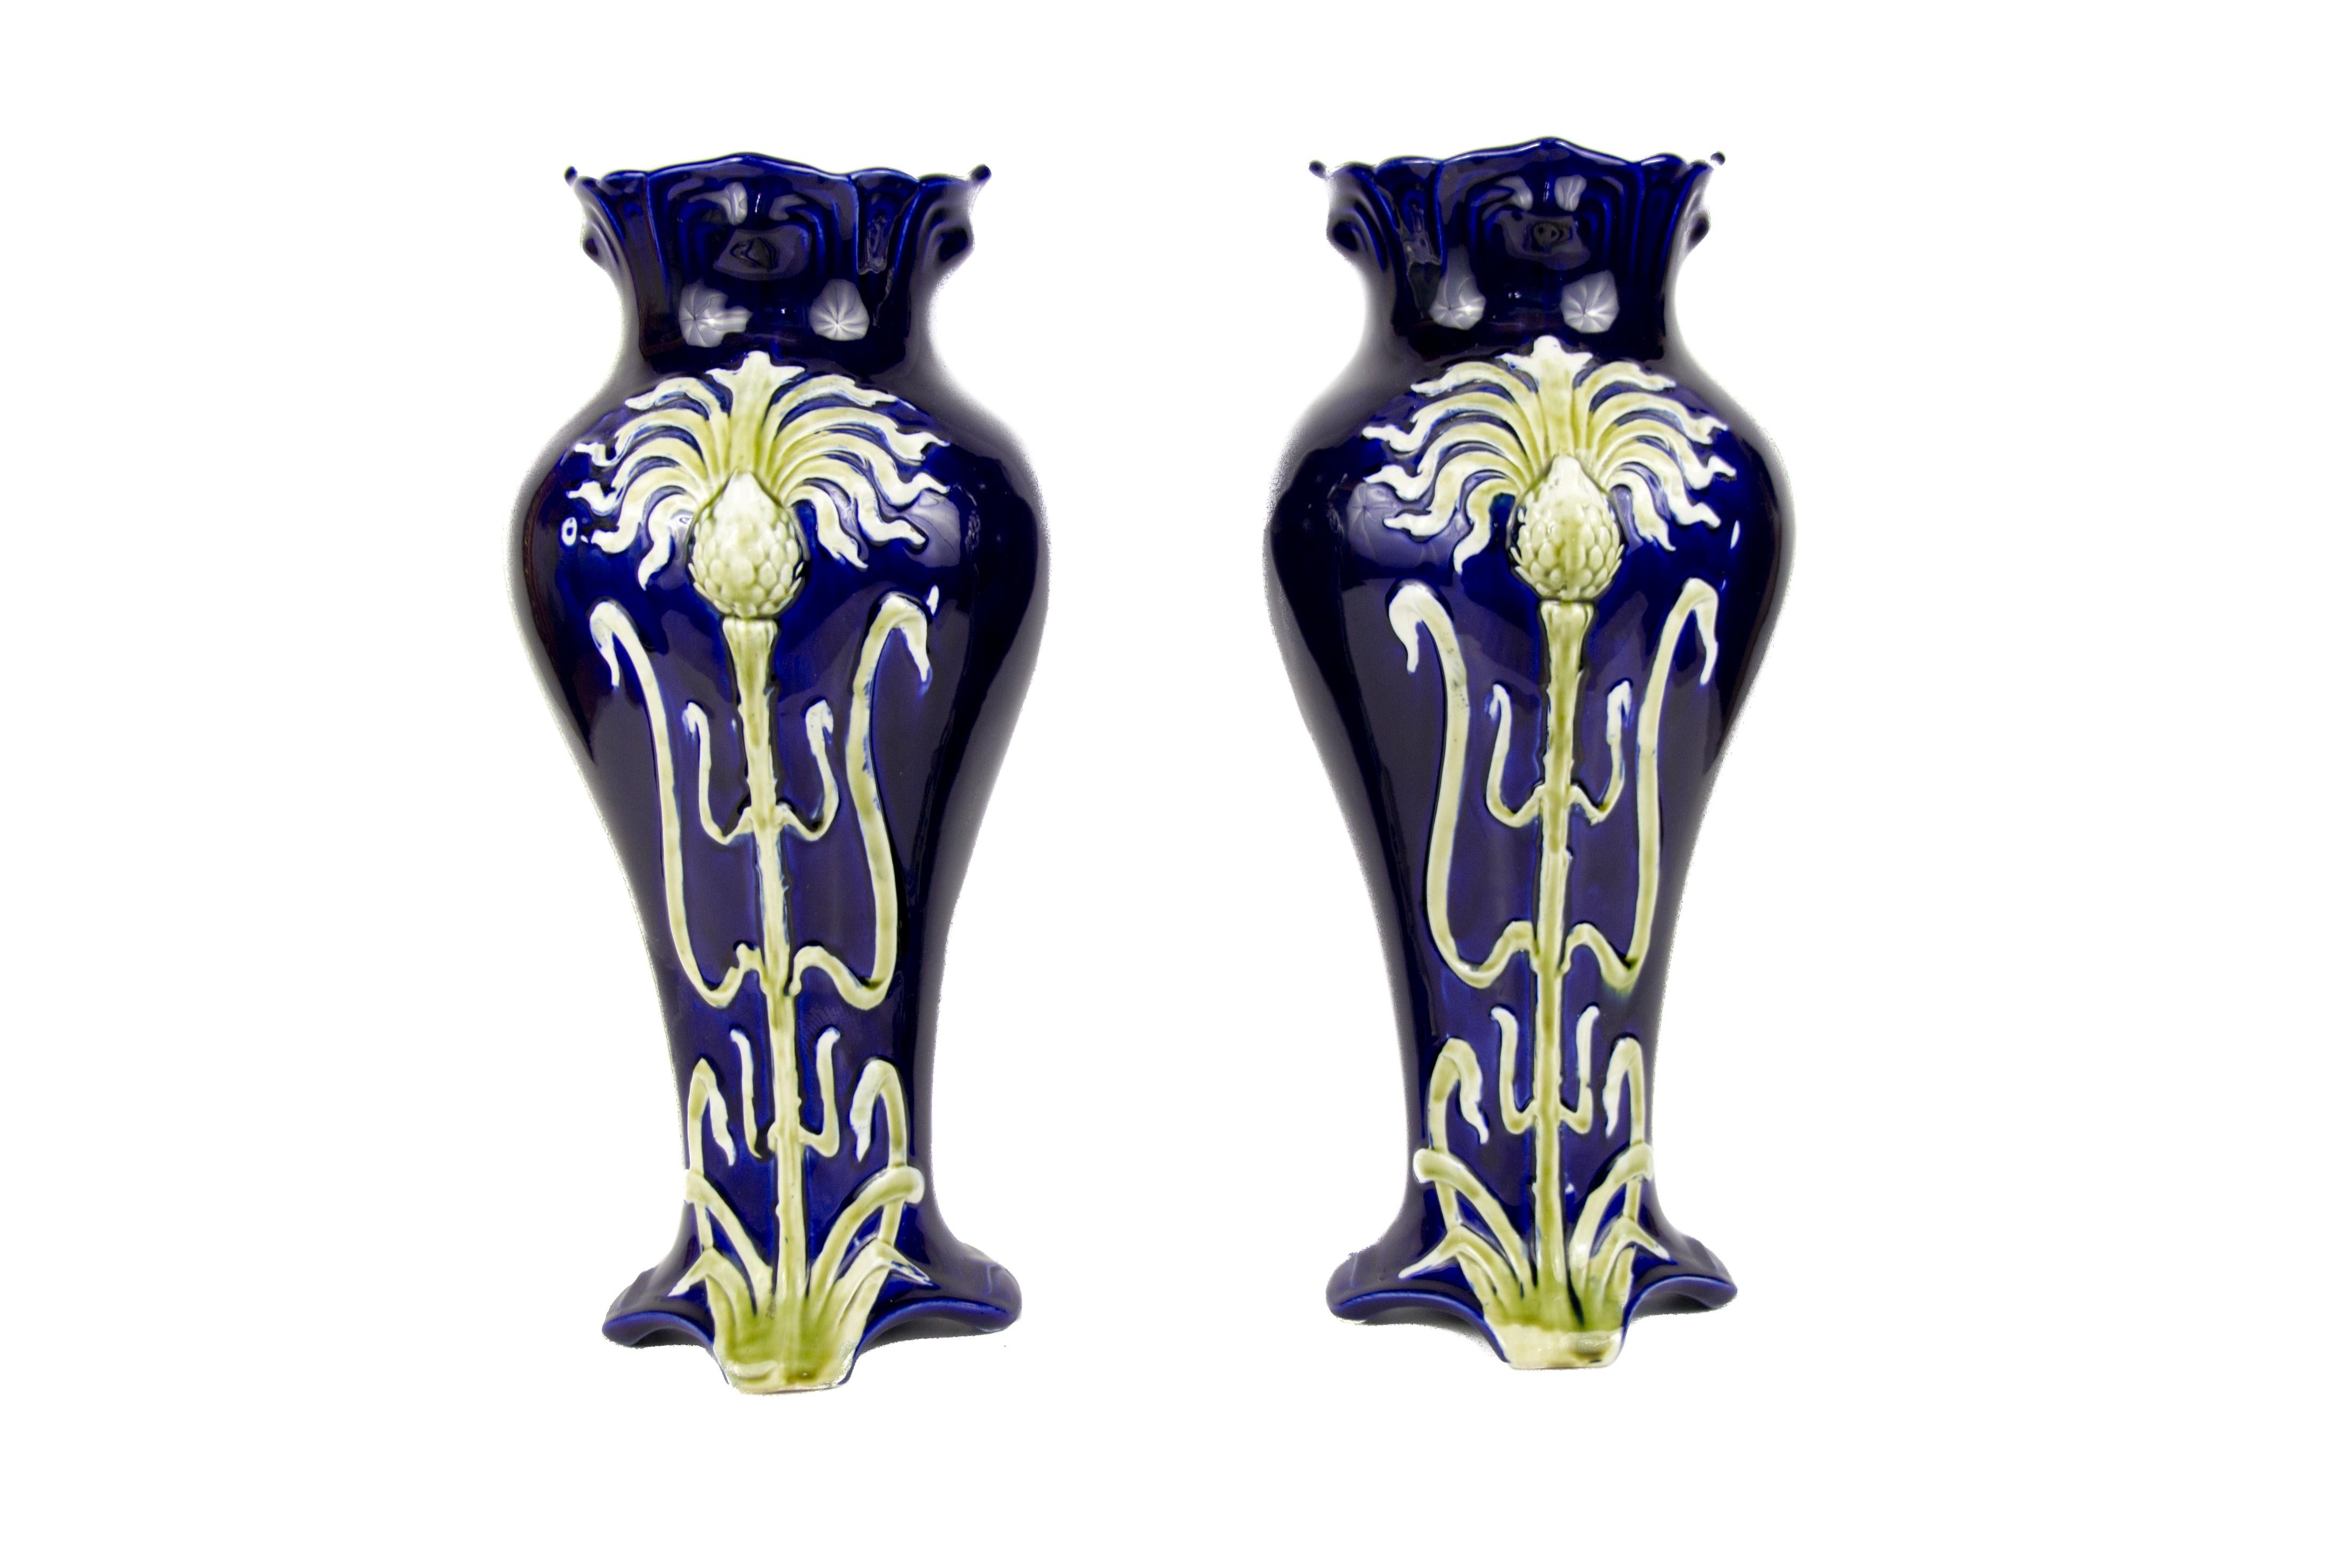 Pair of impressive French Art Nouveau majolica vases by Jean Bernard De Bruyne, circa 1900. The very decorative Art Nouveau vases are in a very good condition for the age. One of the vases has a small chip on bottom on the edge, please, see the